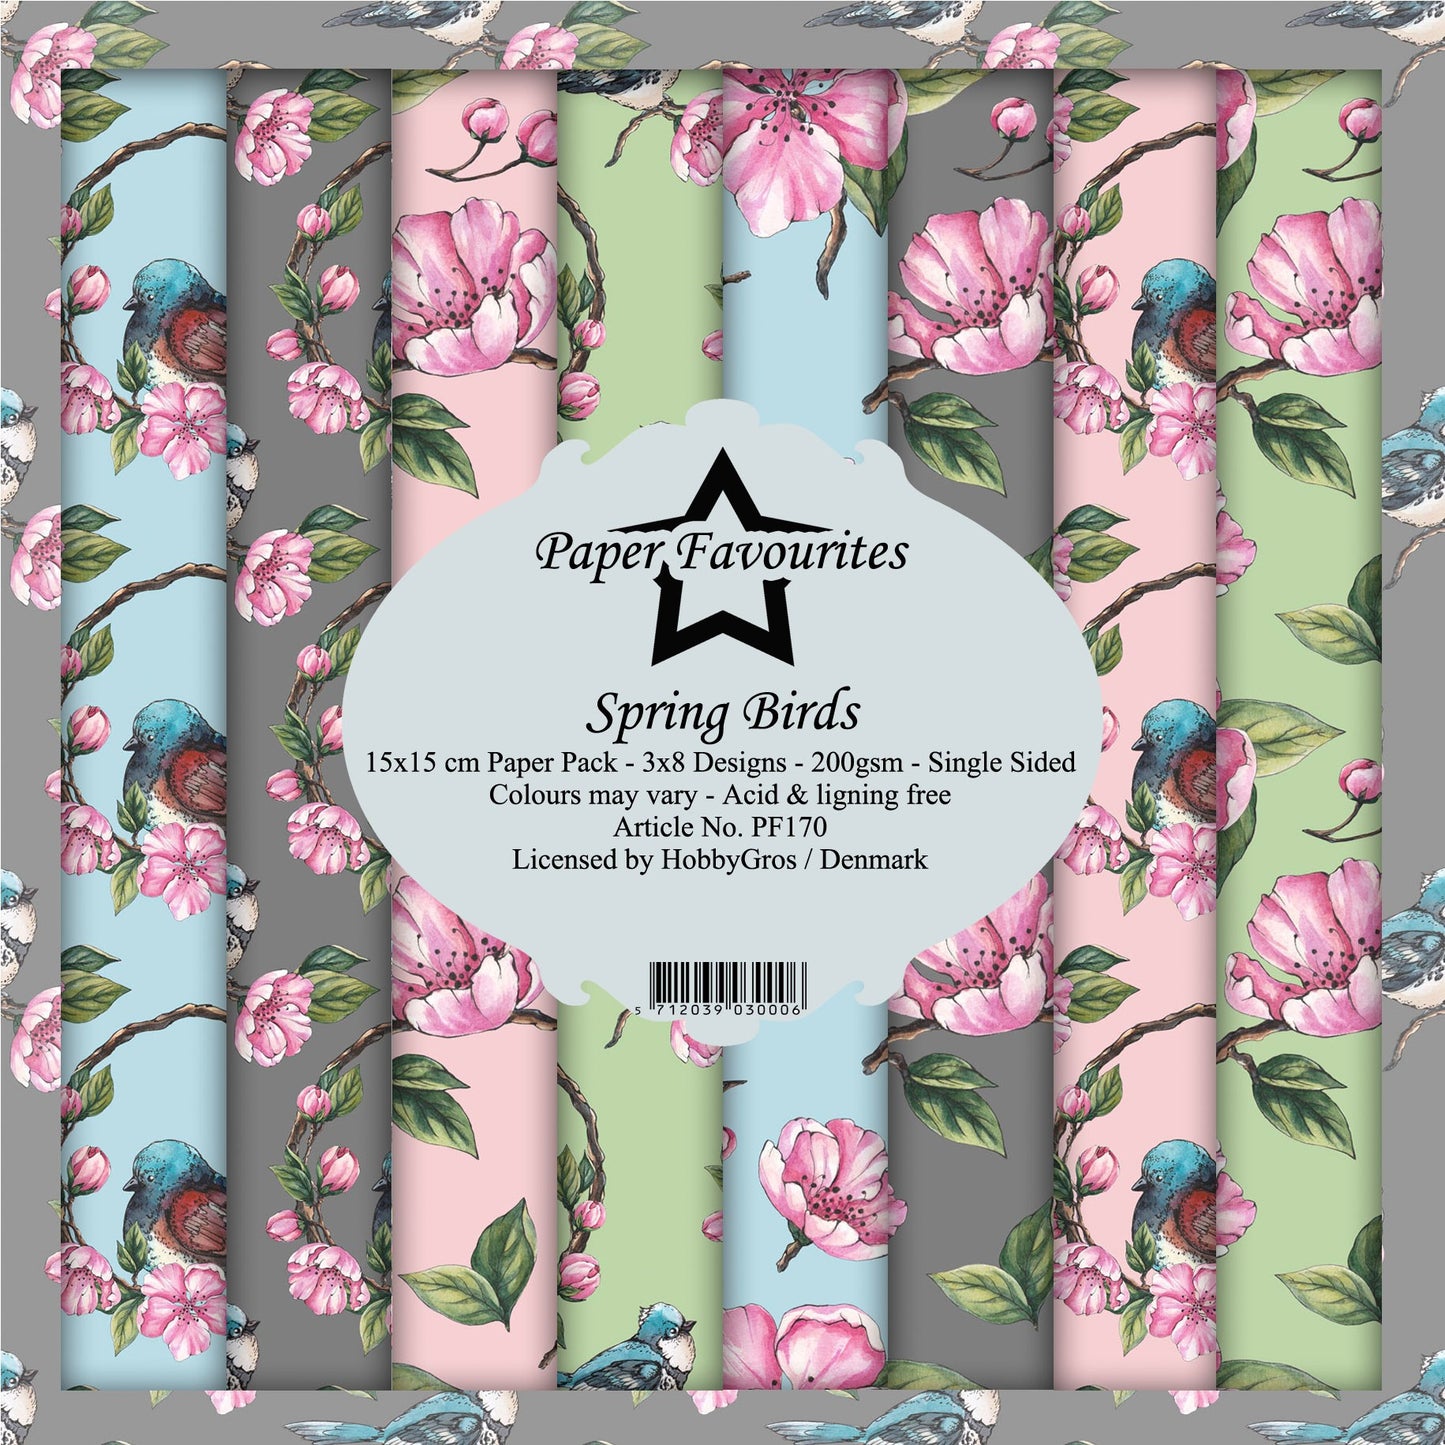 Paper Favourites Spring Birds 6x6 Inch Paper Pack (PF170)